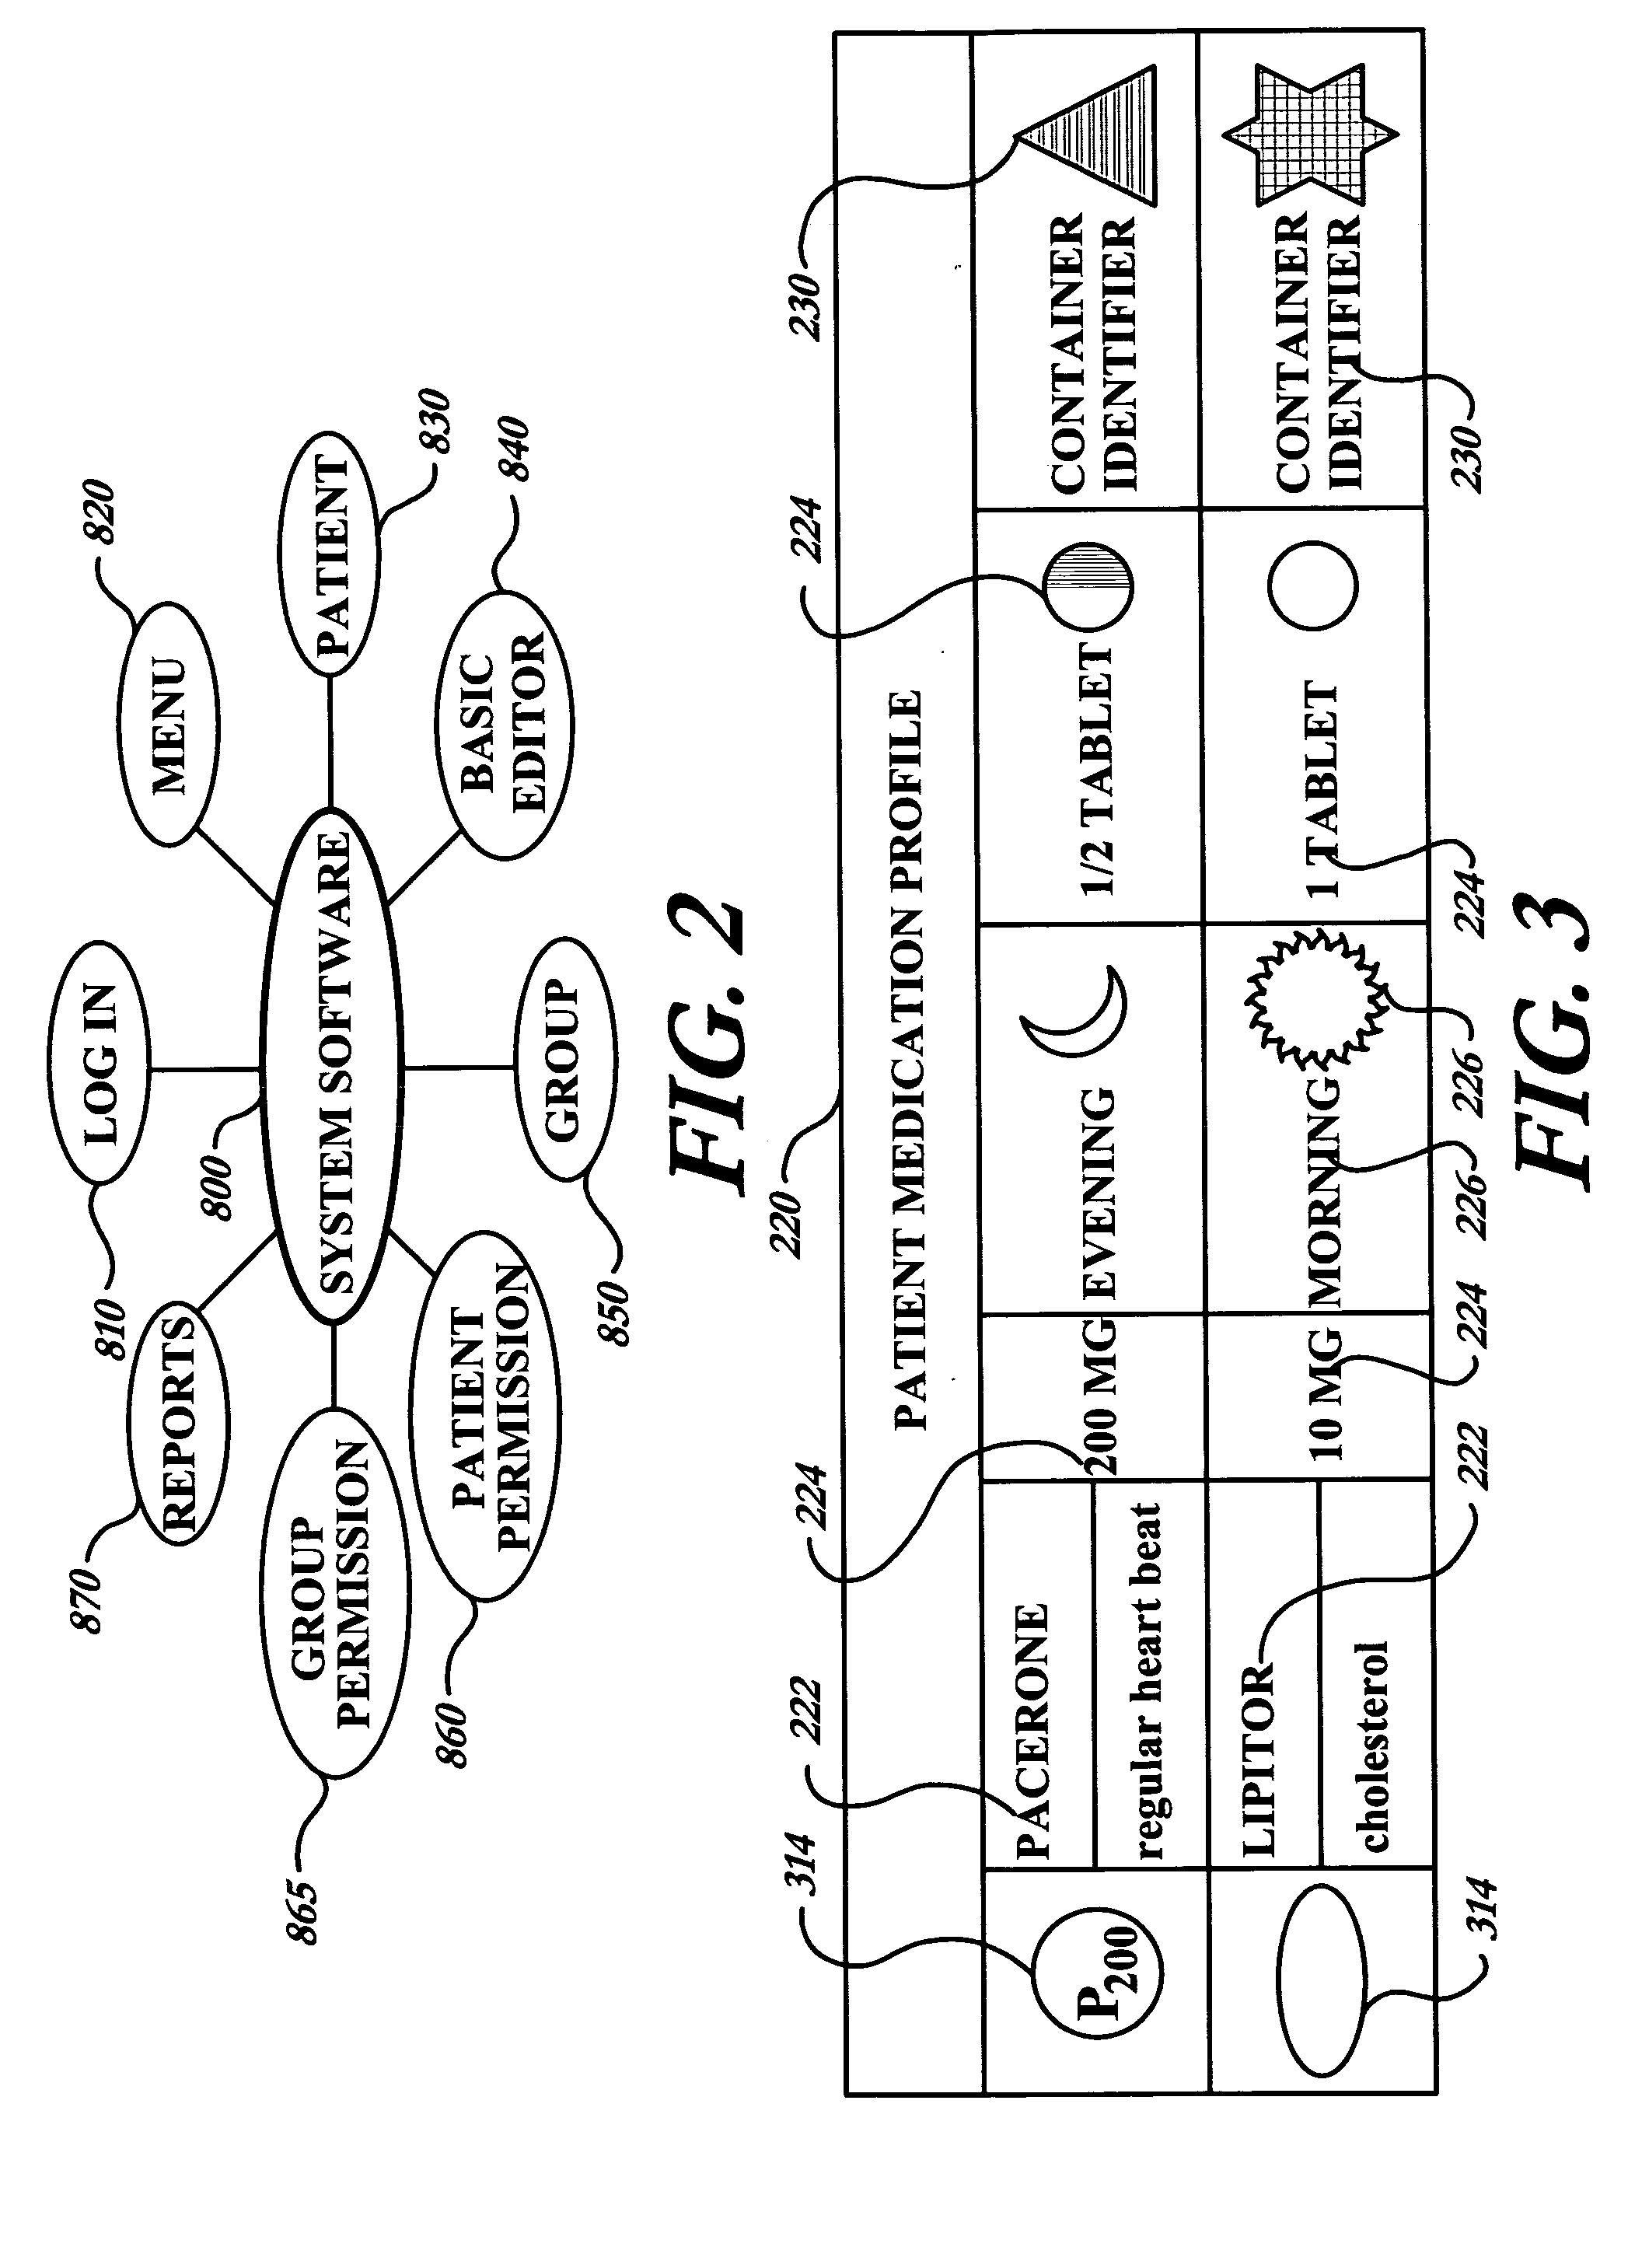 Interactive multi-user medication and medical history management method